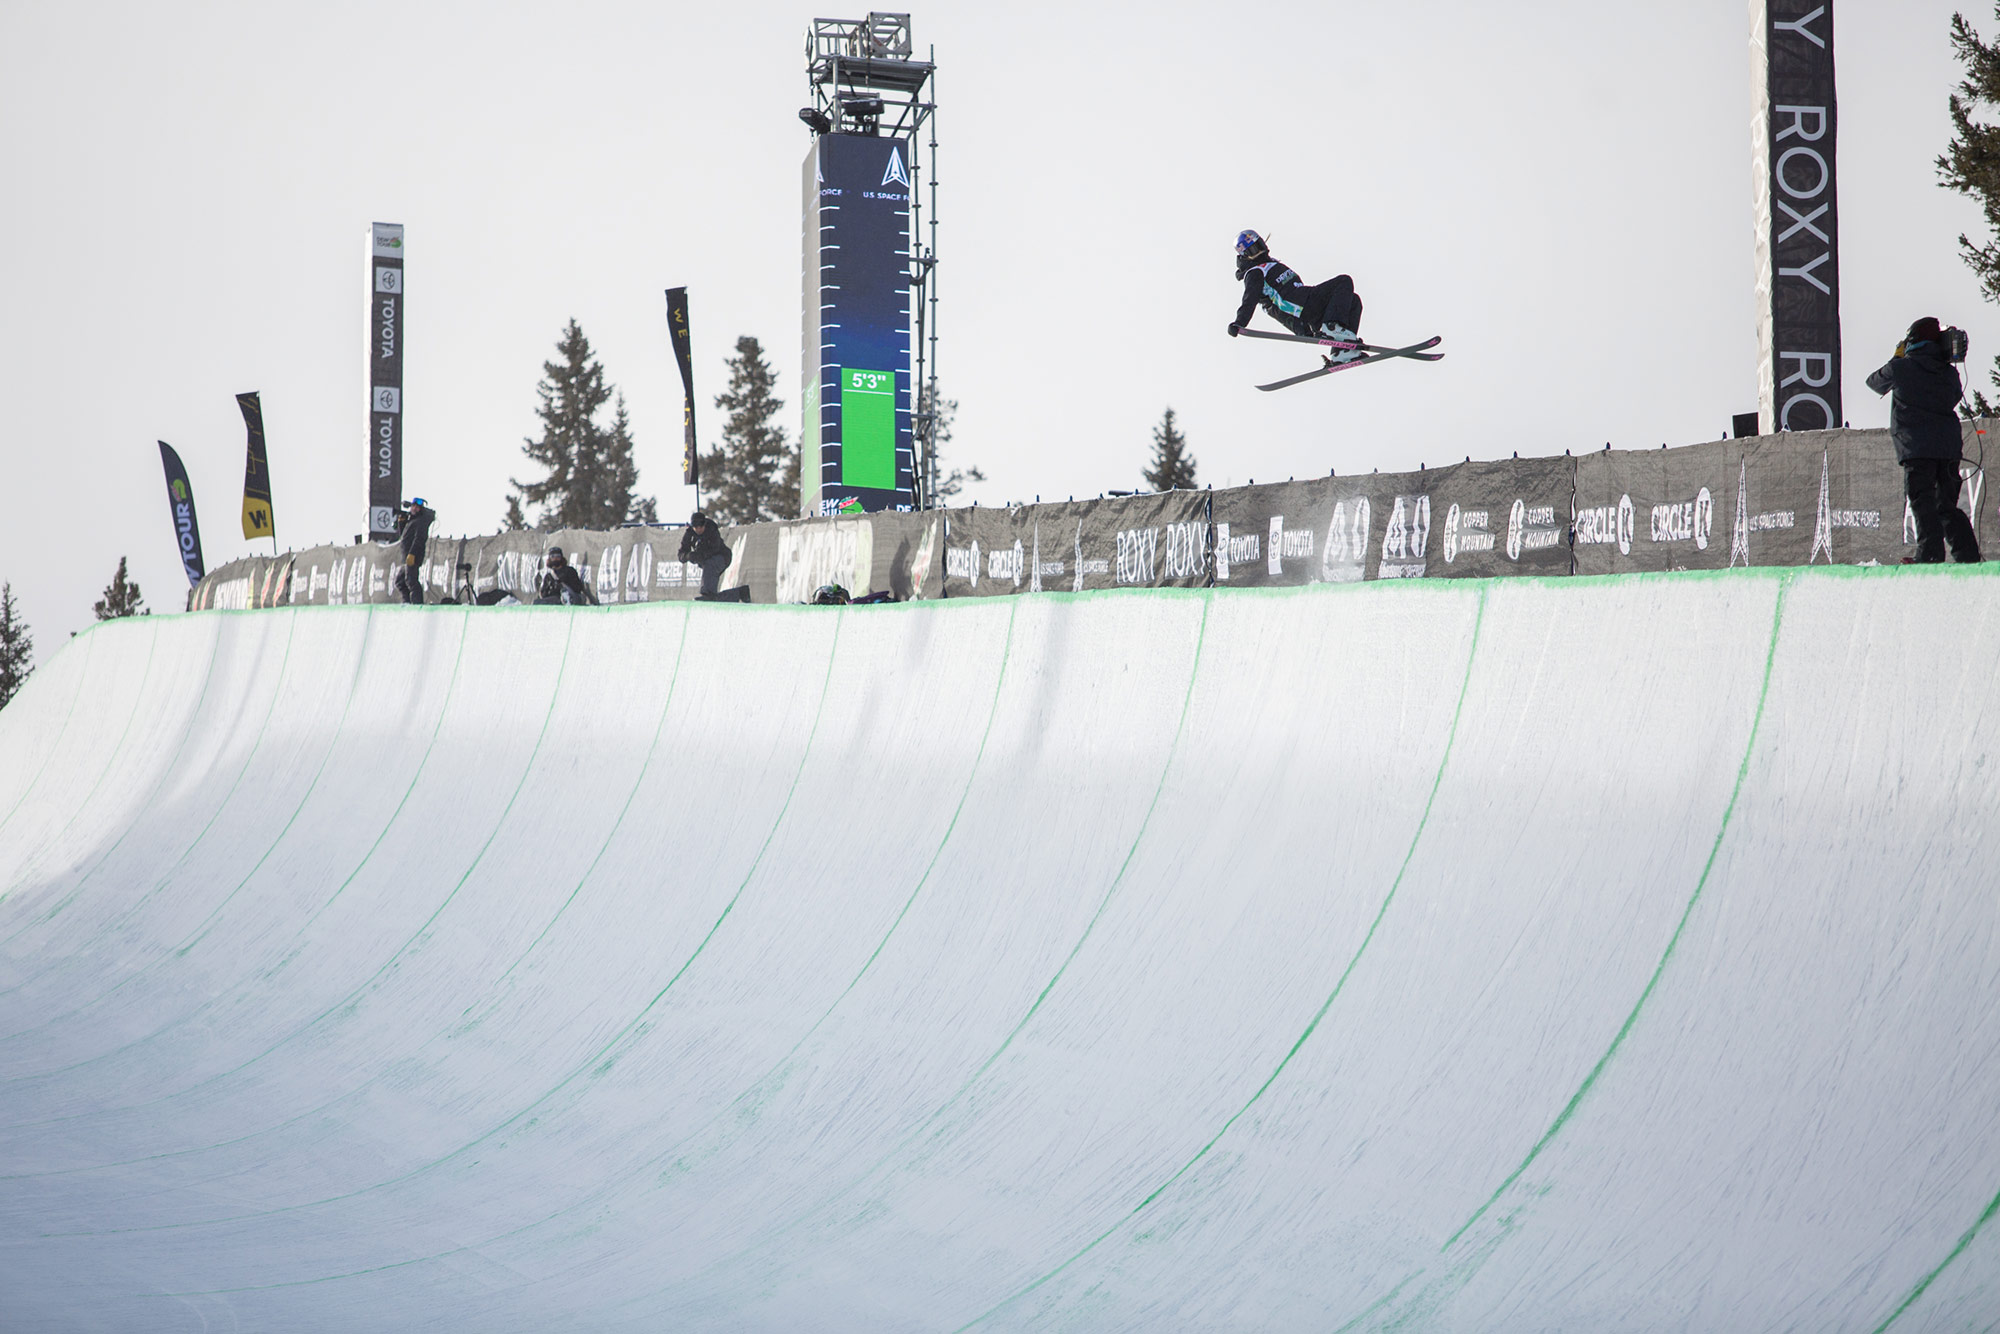 Kelly Sildaru competes in women's ski halfpipe finals at the 2021 Winter Dew Tour in Copper Mountain, Colorado.